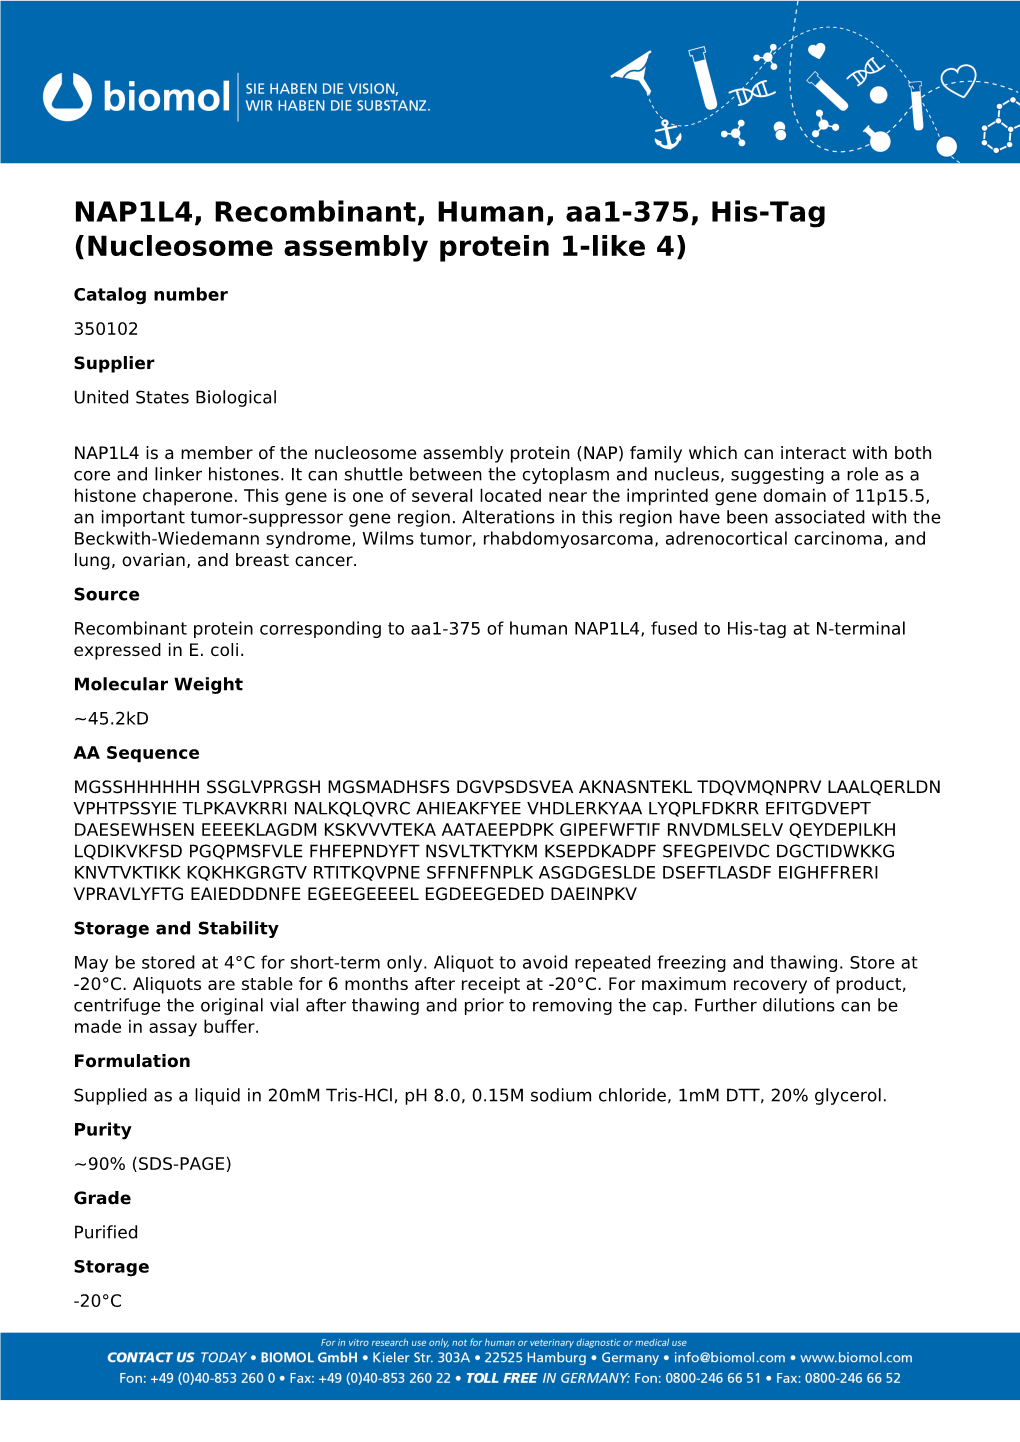 NAP1L4, Recombinant, Human, Aa1-375, His-Tag (Nucleosome Assembly Protein 1-Like 4)